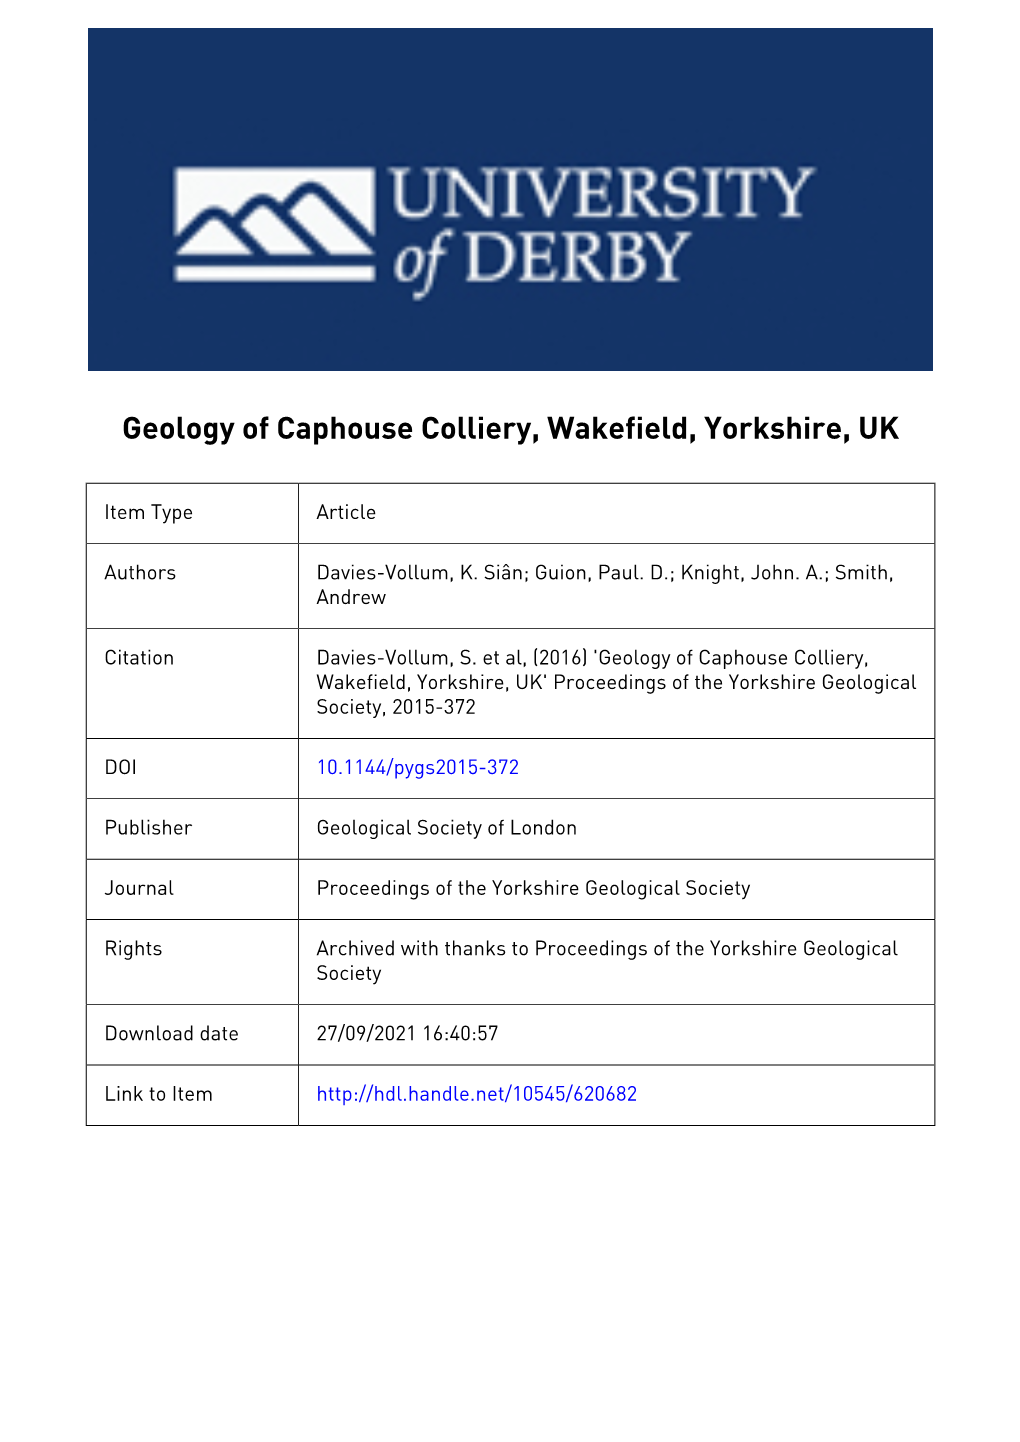 1 Geology of Caphouse Colliery, Wakefield, Yorkshire, UK 1 K. S